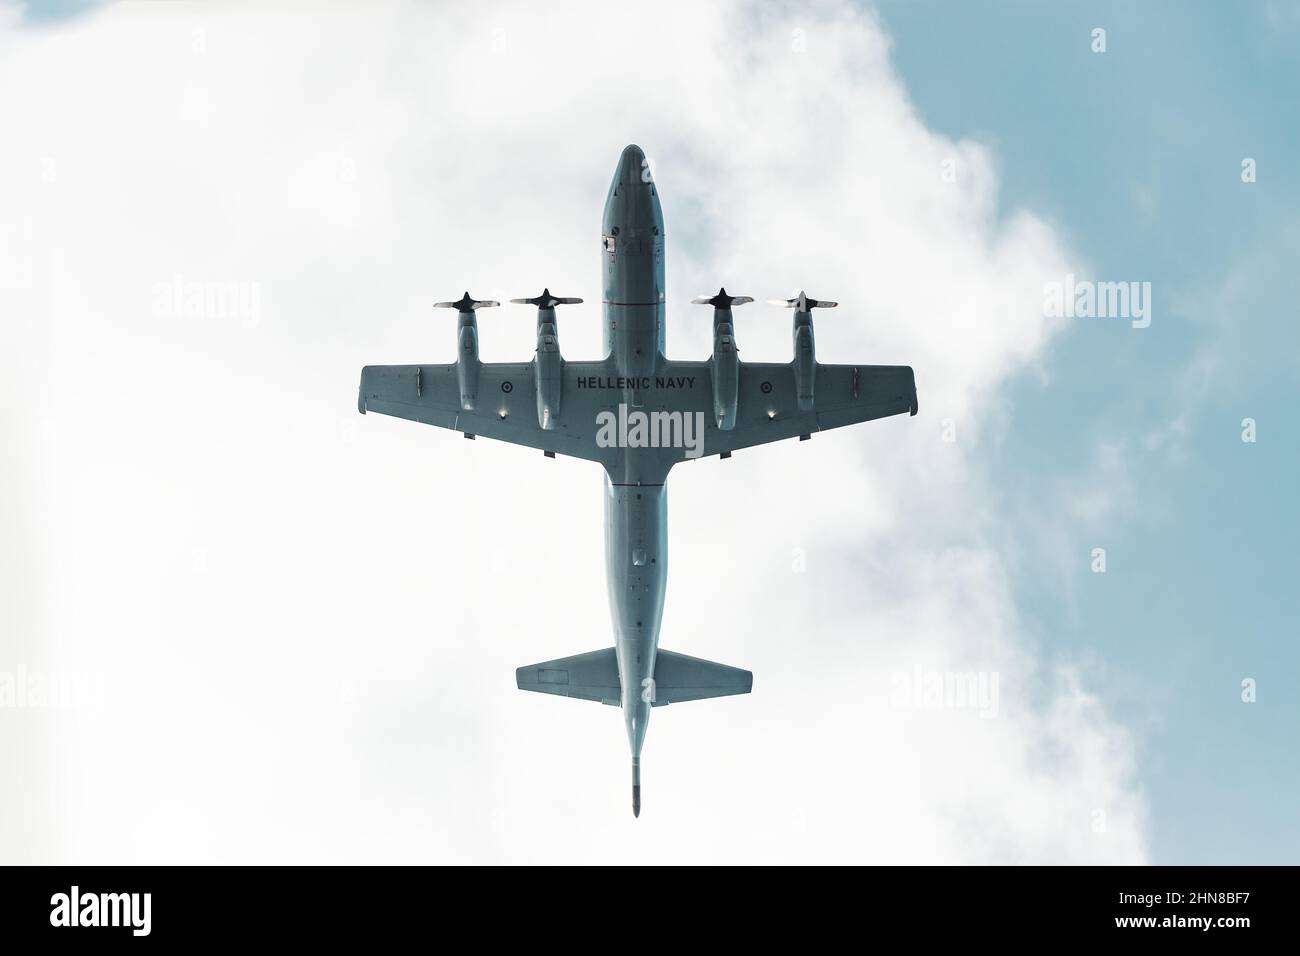 Huge military transport plane of Hellenic Navy or bomber with propellers view from below. The concept of air clashes and armed conflicts in Greece Stock Photo